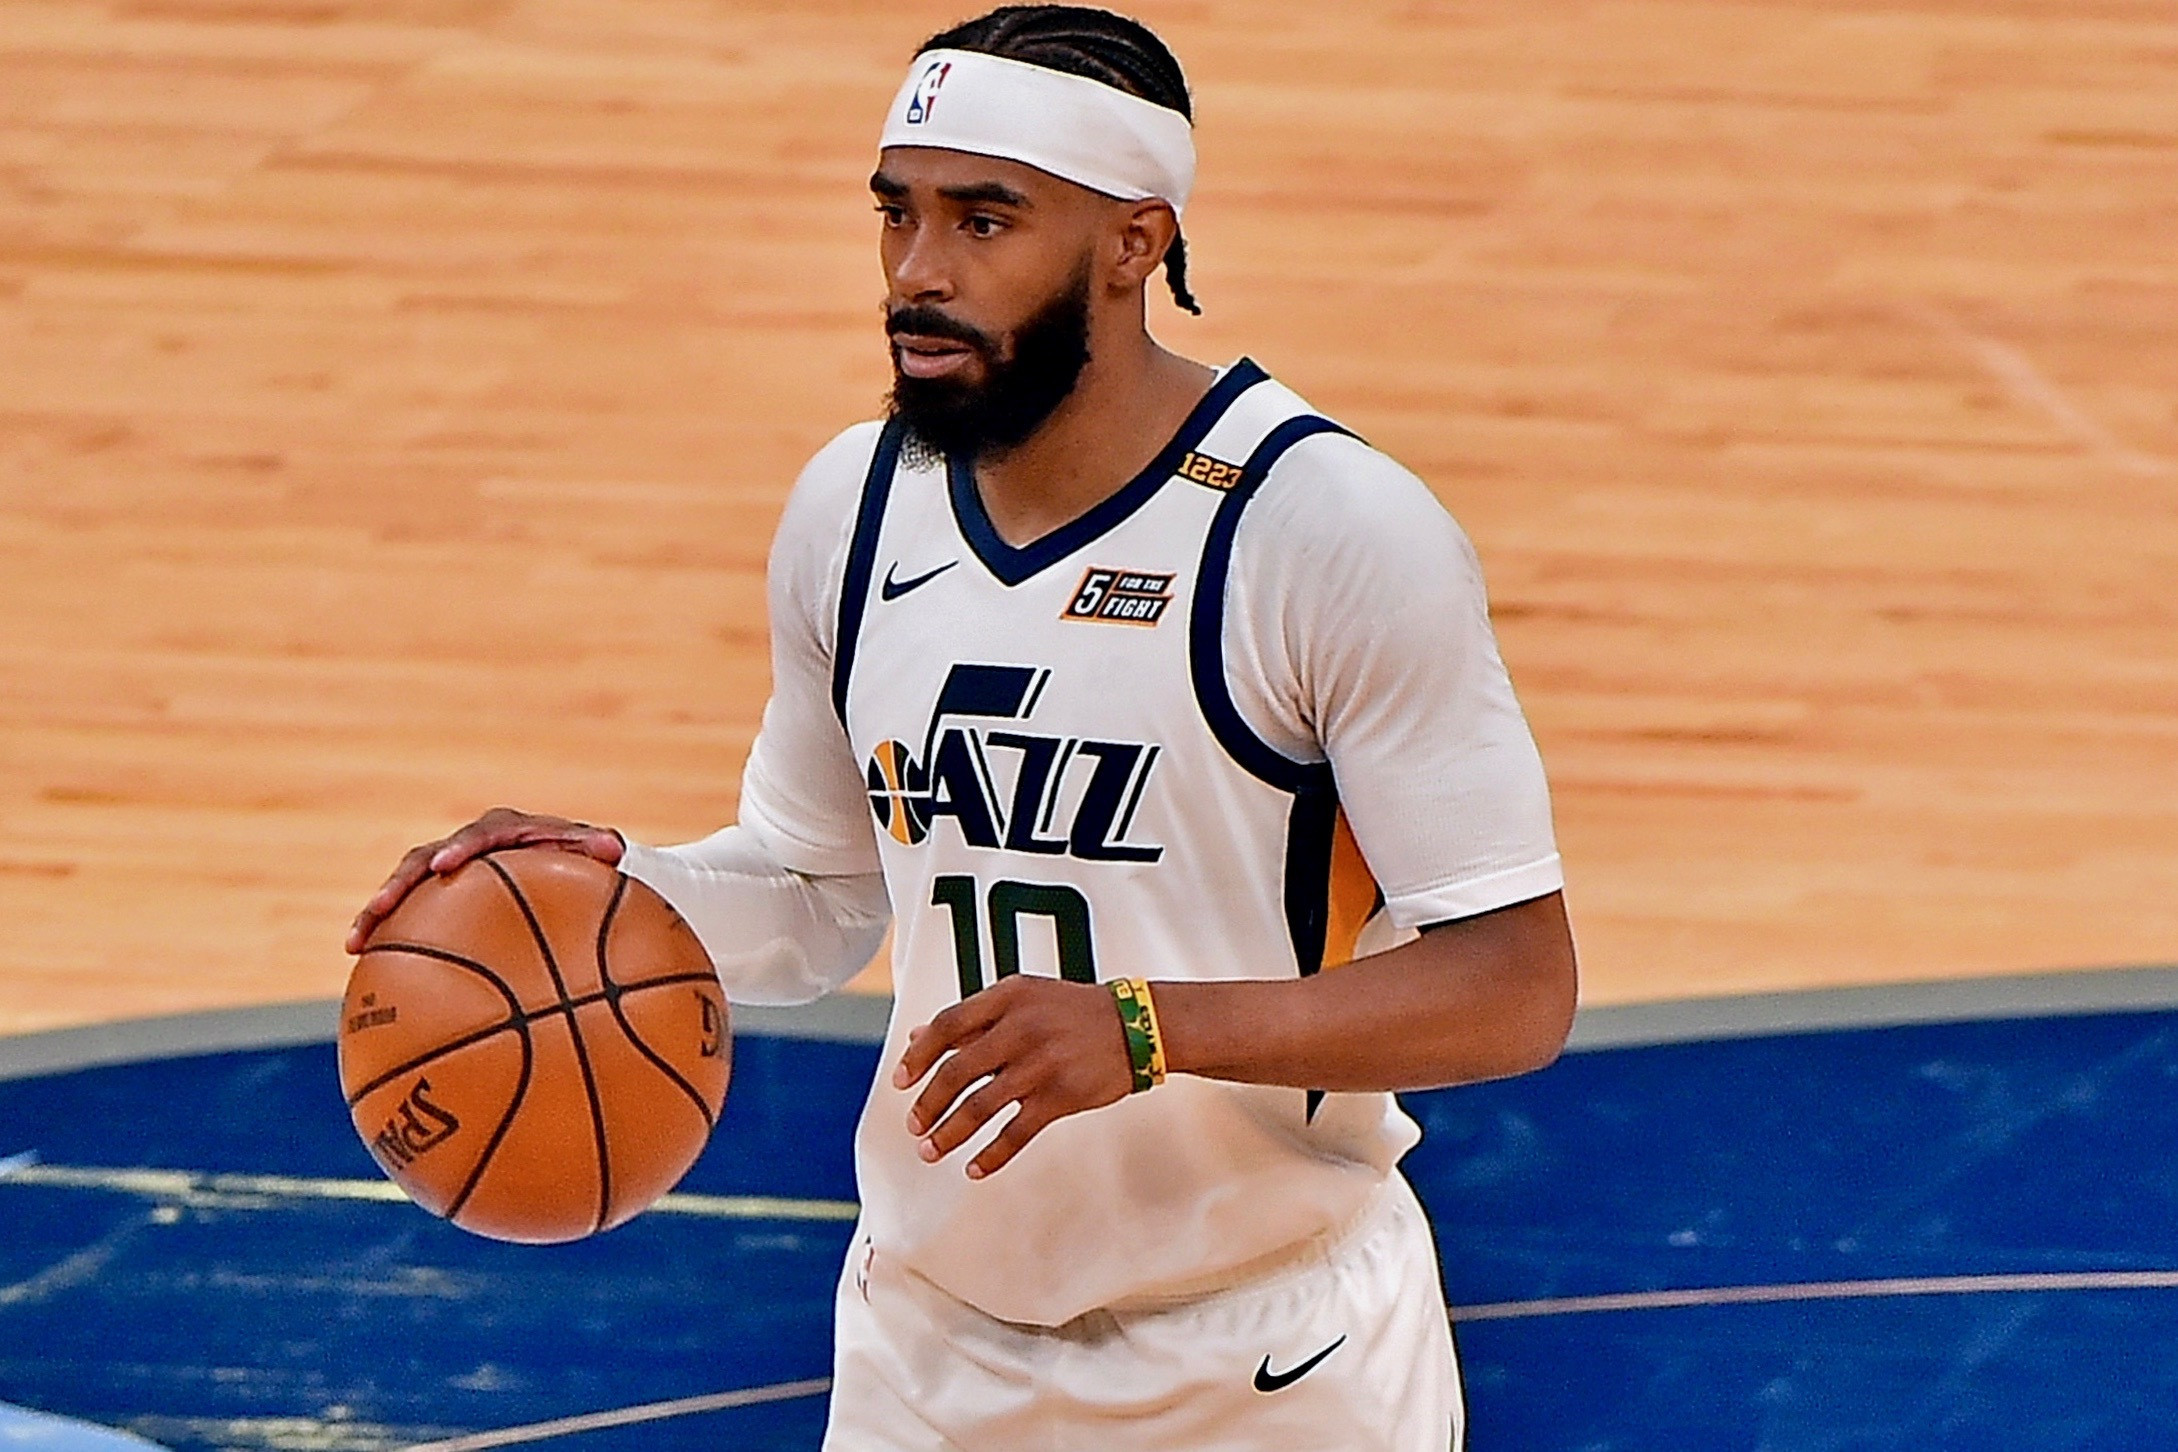 Utah Jazz fans may have to wait longer for Mike Conley's on-court debut -  SLC Dunk